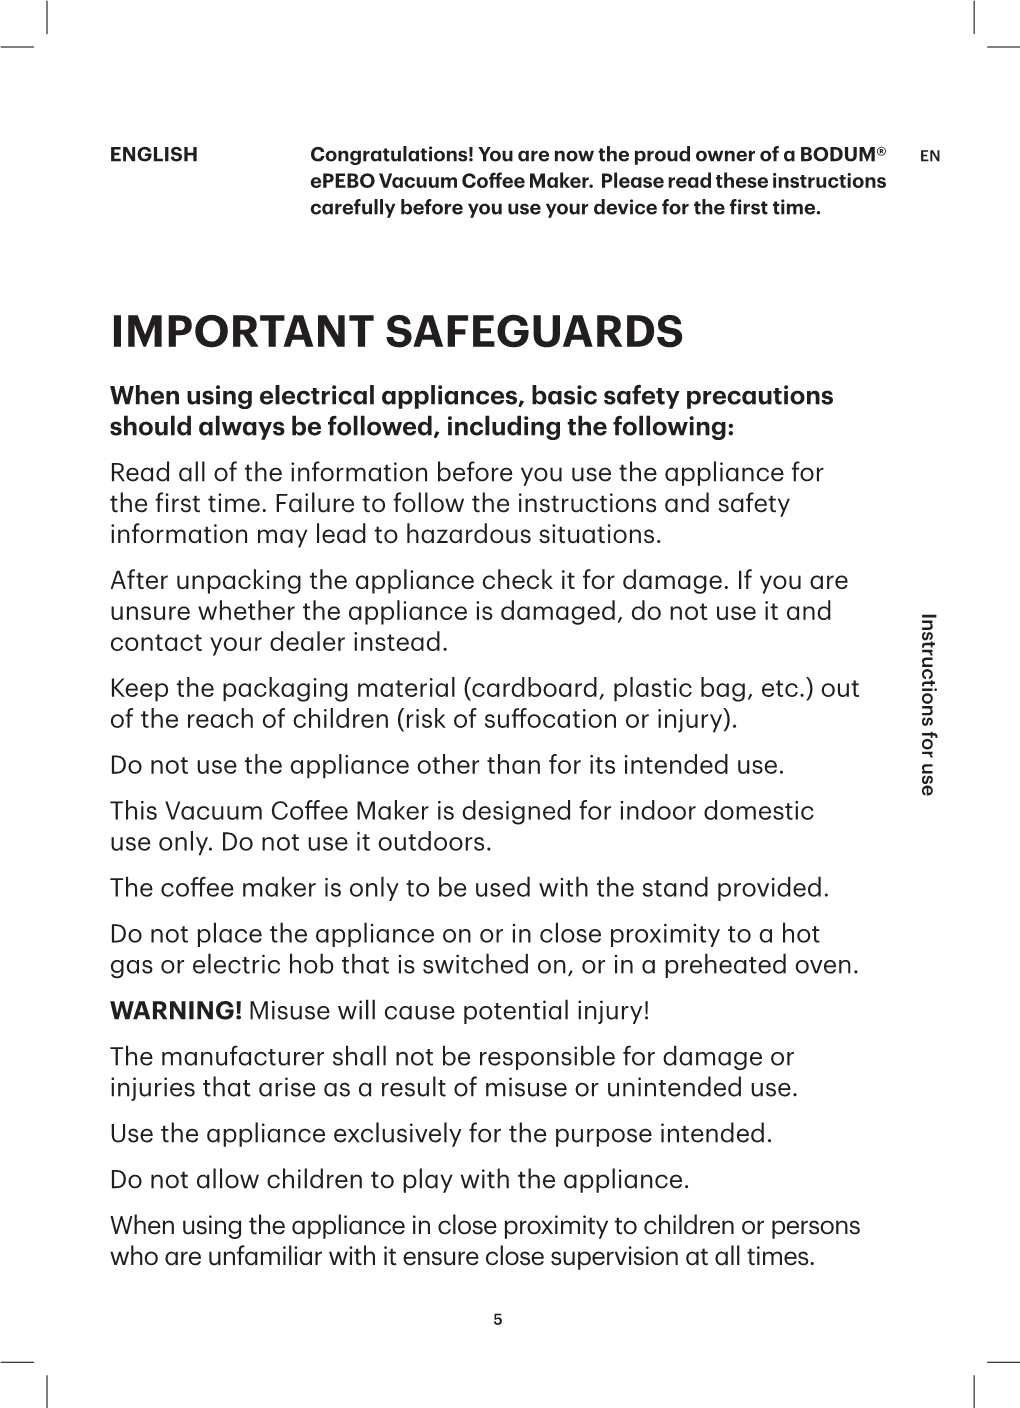 Important Safeguards